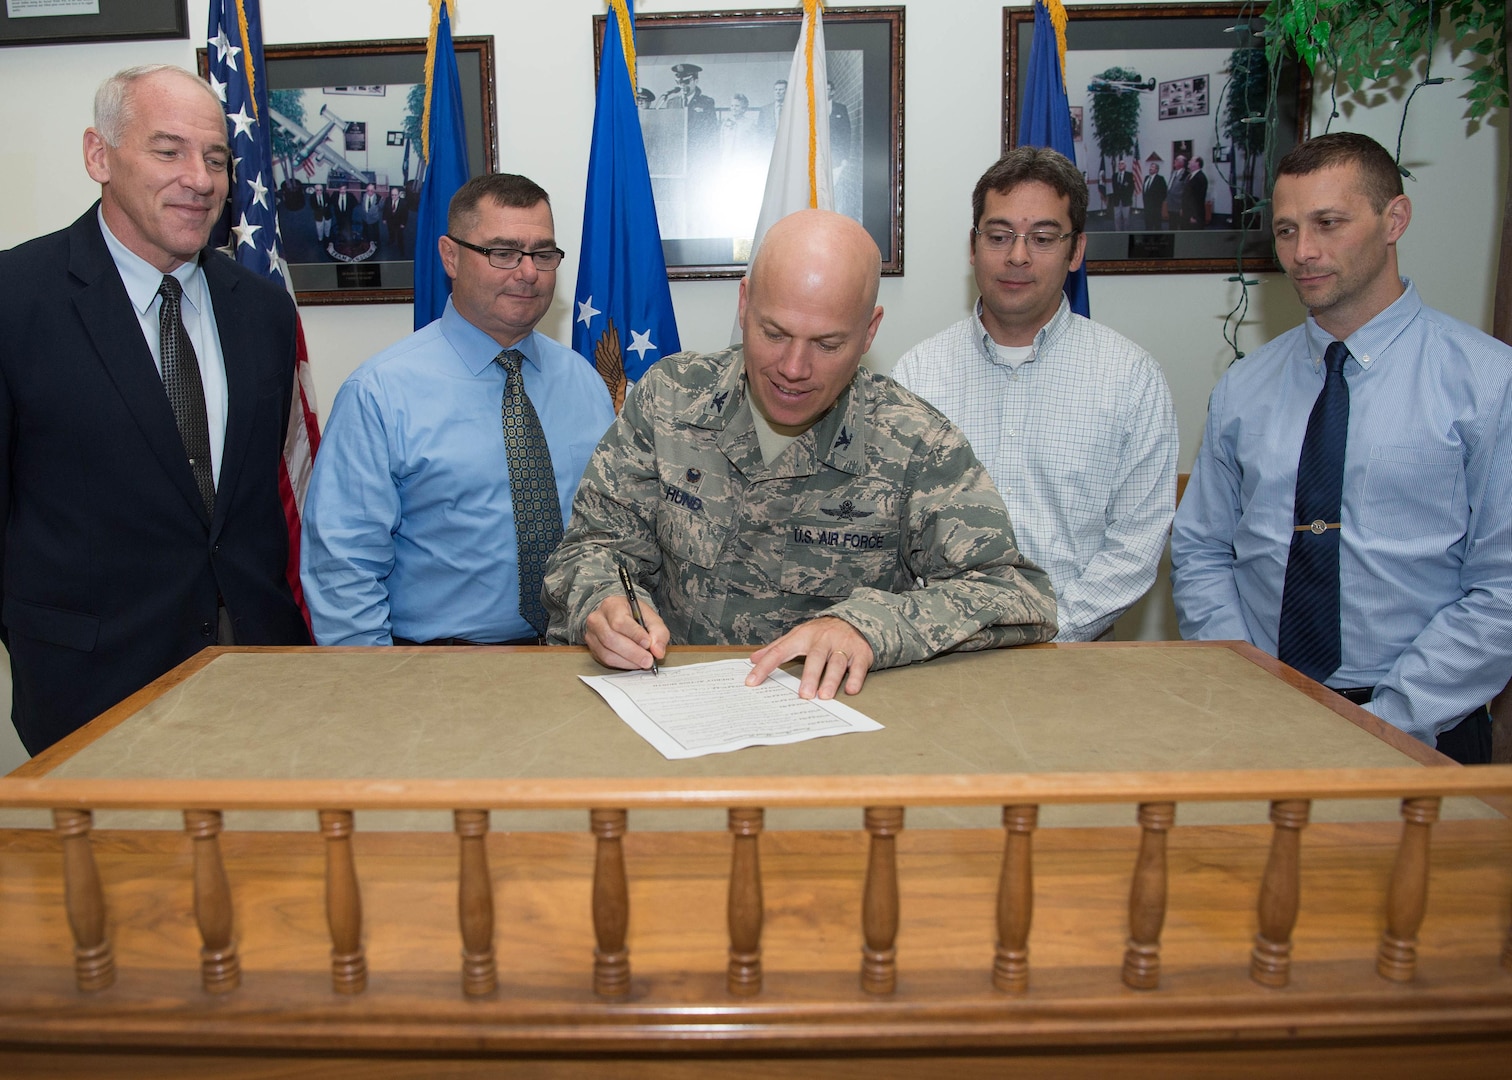 Col. Roman L. Hund, installation commander, signs an Energy Action Month proclamation in Building 1305 Sept. 30, while Thomas Schluckebier, left-to-right, Mike Lynch, David Wong and Brett Castle look on. As part of the month-long campaign, the 66th Civil Engineering Division requests employees find ways to reduce energy and water consumption at work, home and in their communities. (U.S. Air Force photo by Jerry Saslav)